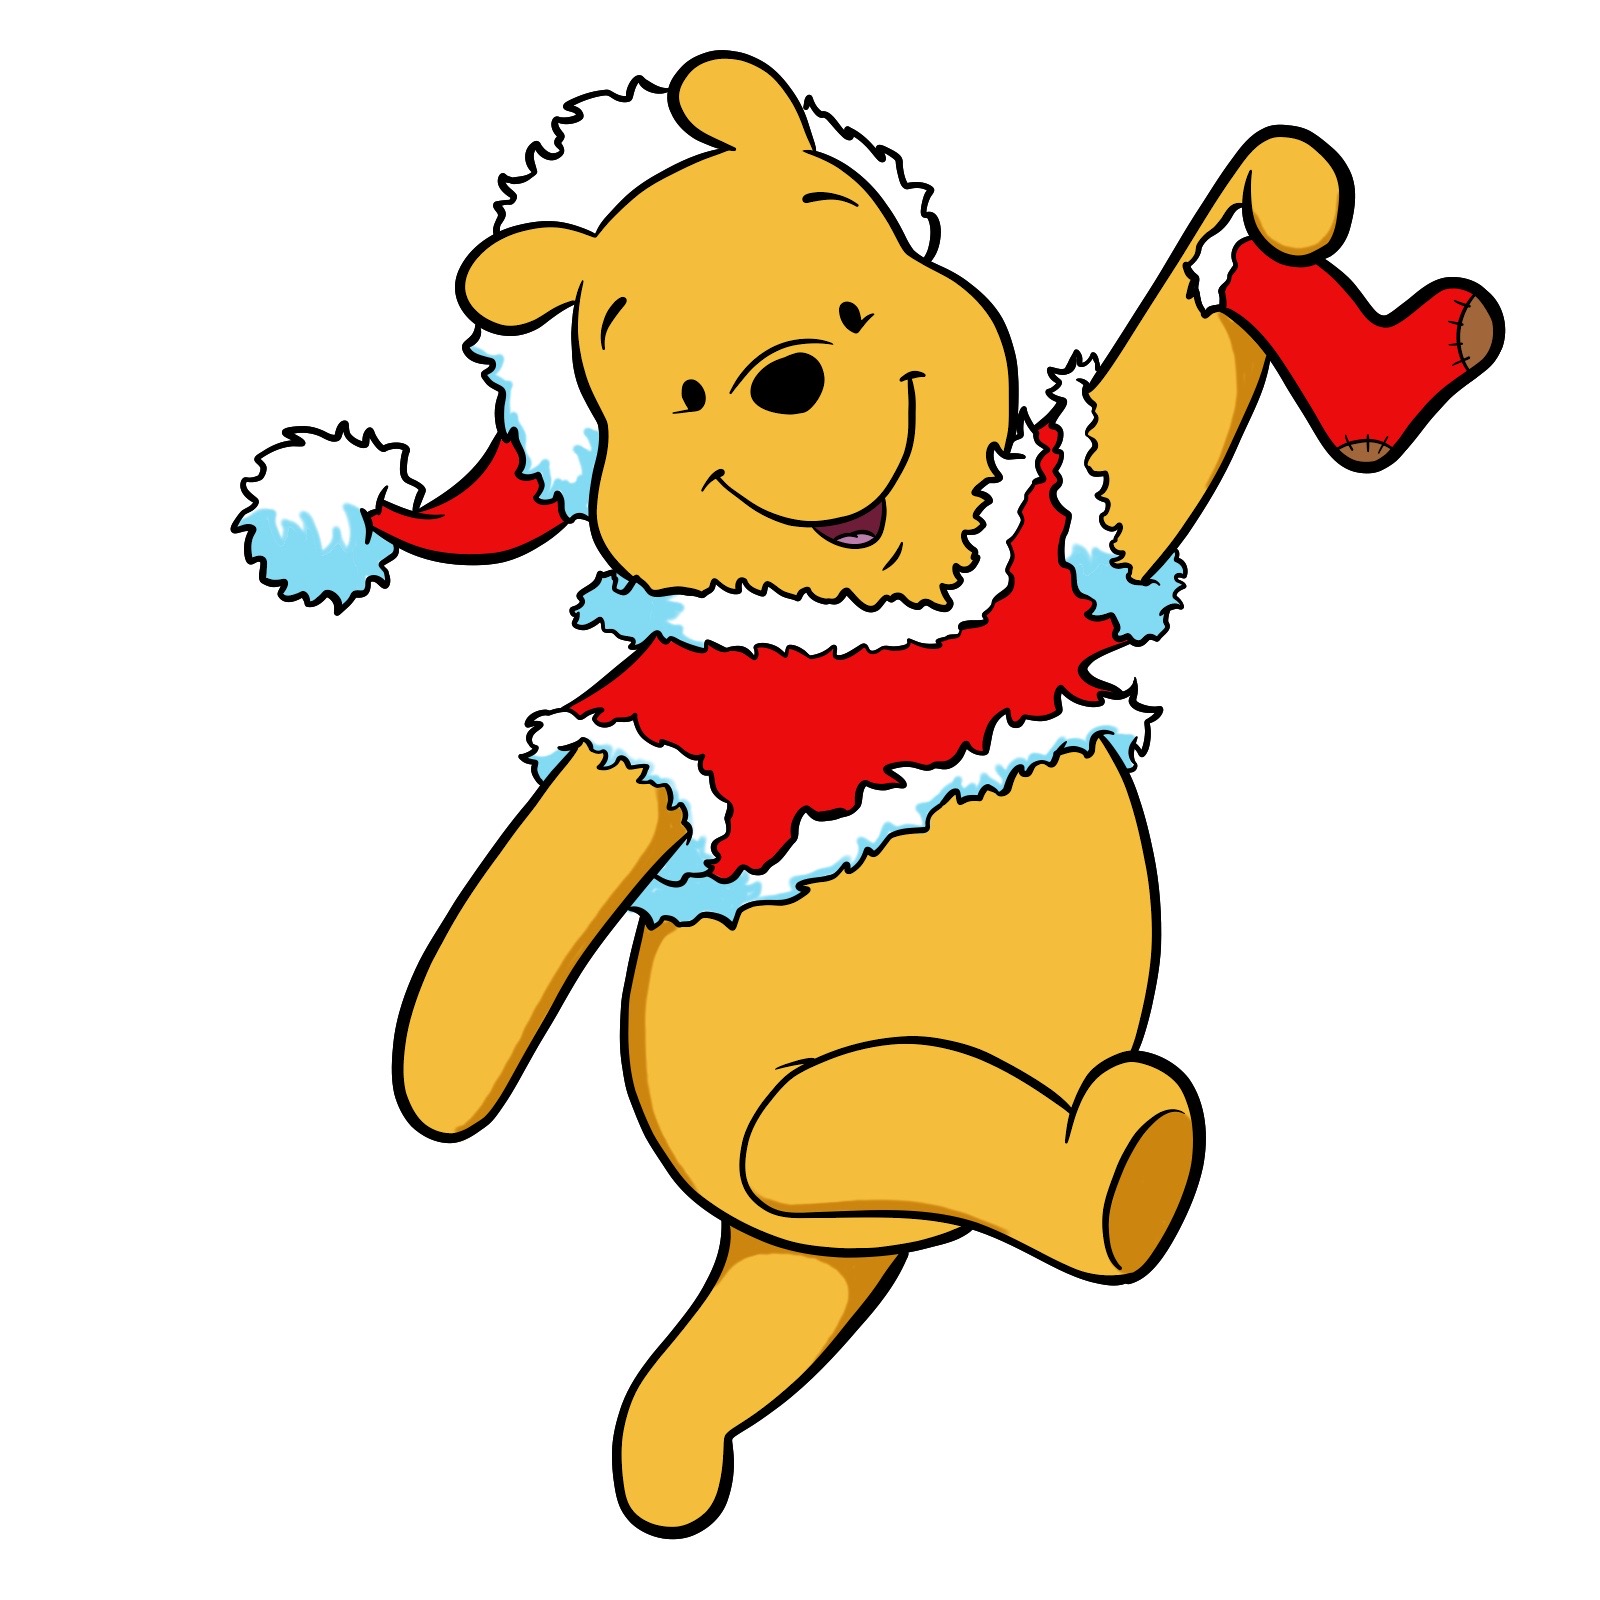 How to draw Winnie-the-Pooh Christmas style - final step